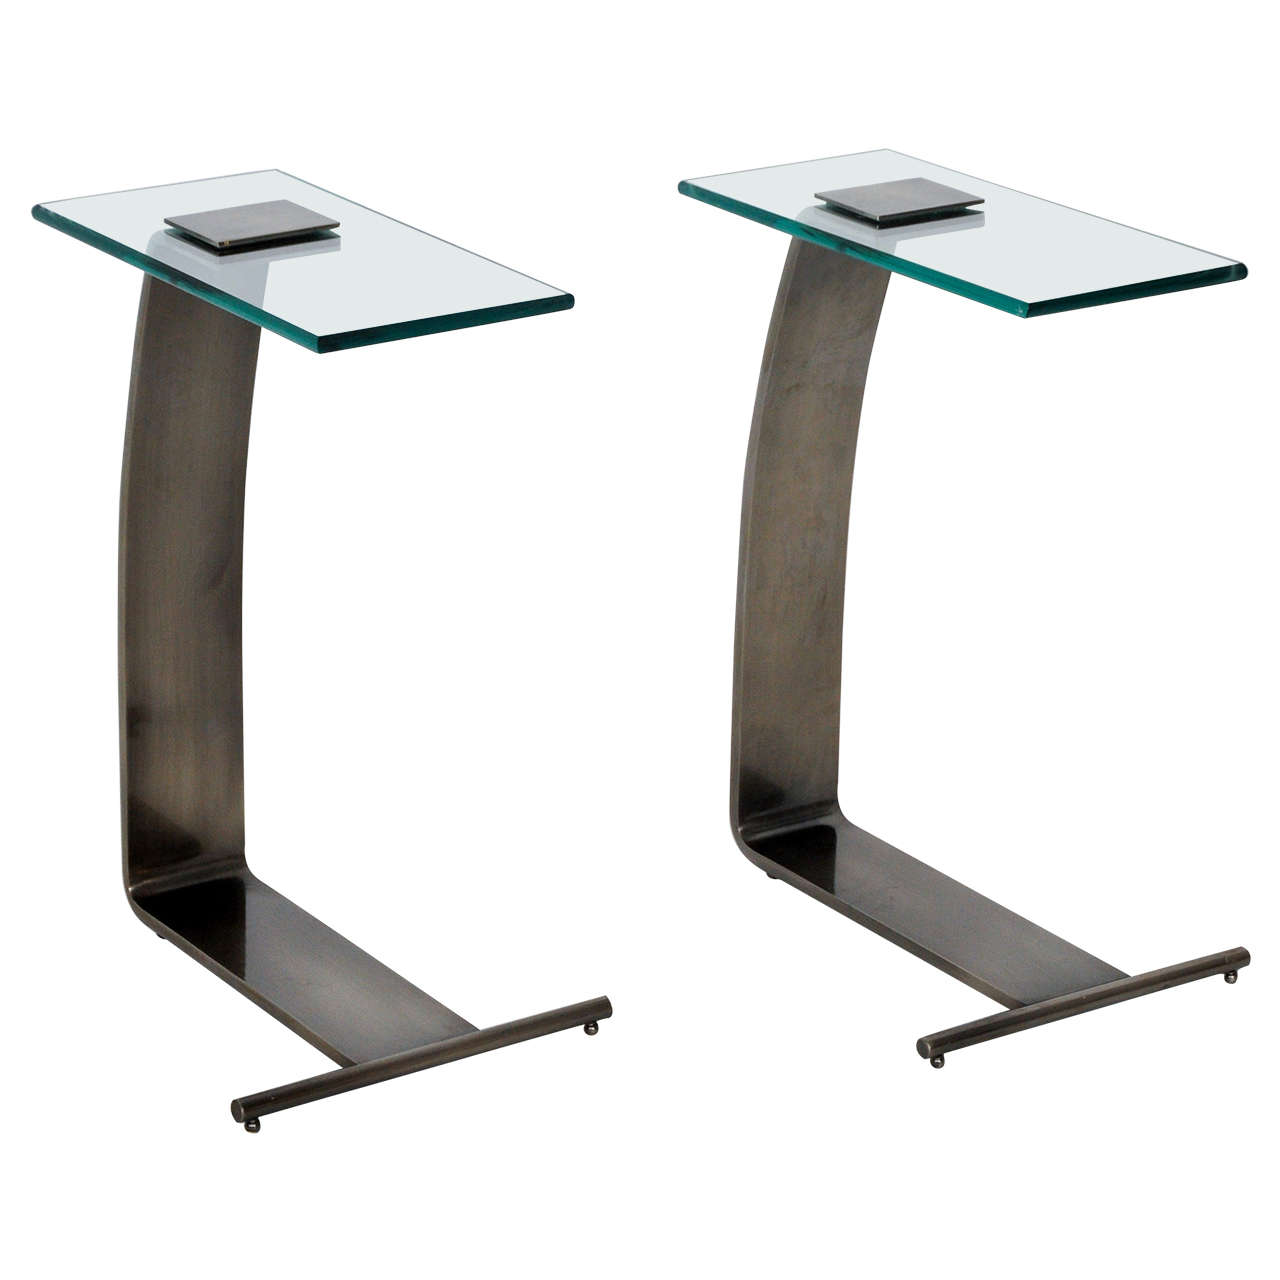 Pair of DIA Side Tables in Gunmetal Finish